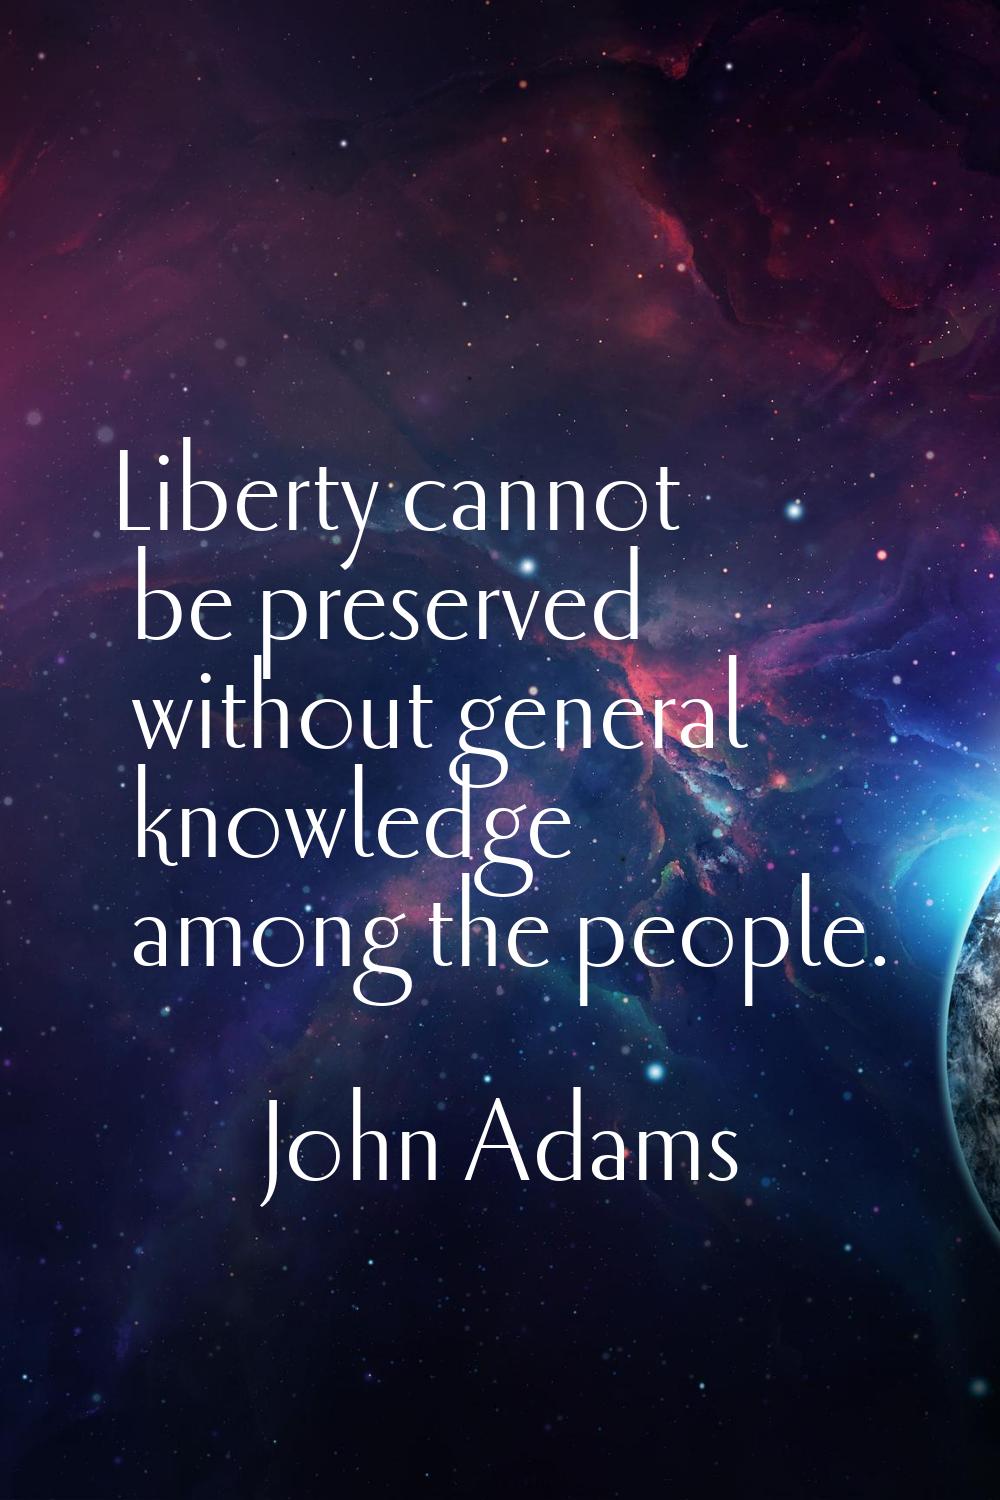 Liberty cannot be preserved without general knowledge among the people.